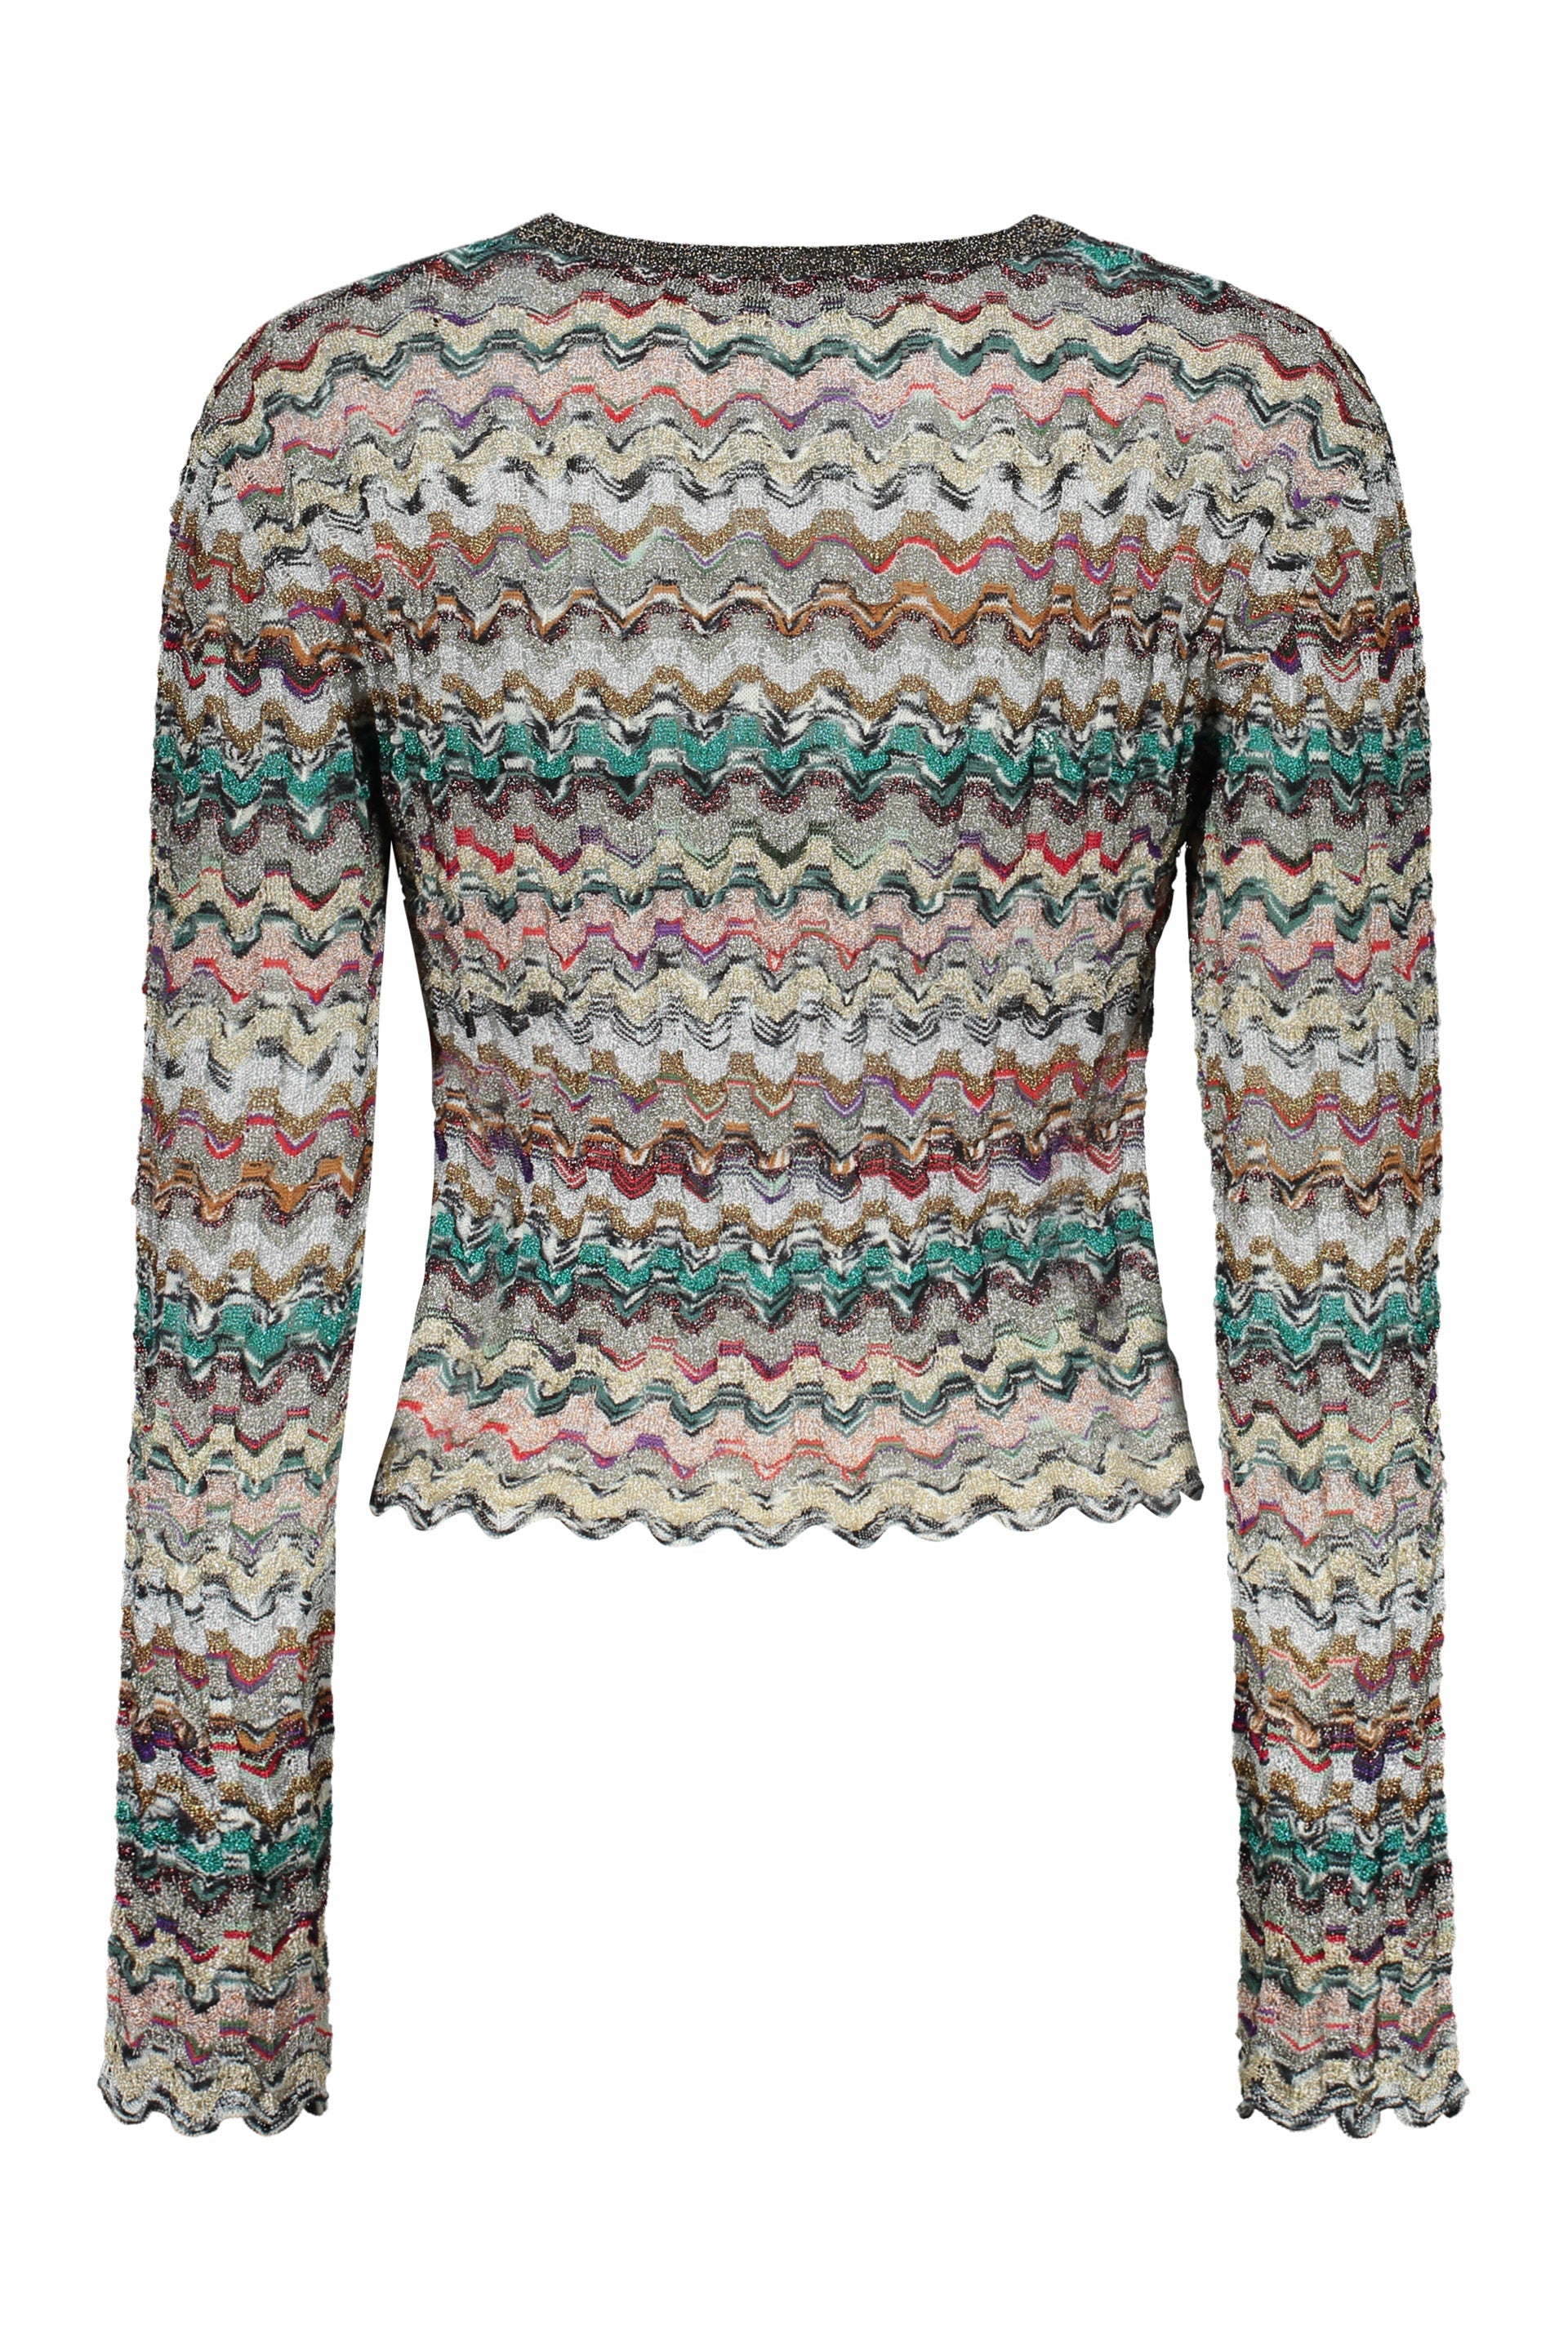 Missoni-OUTLET-SALE-Ribbed-crew-neck-sweater-Strick-ARCHIVE-COLLECTION-2.jpg